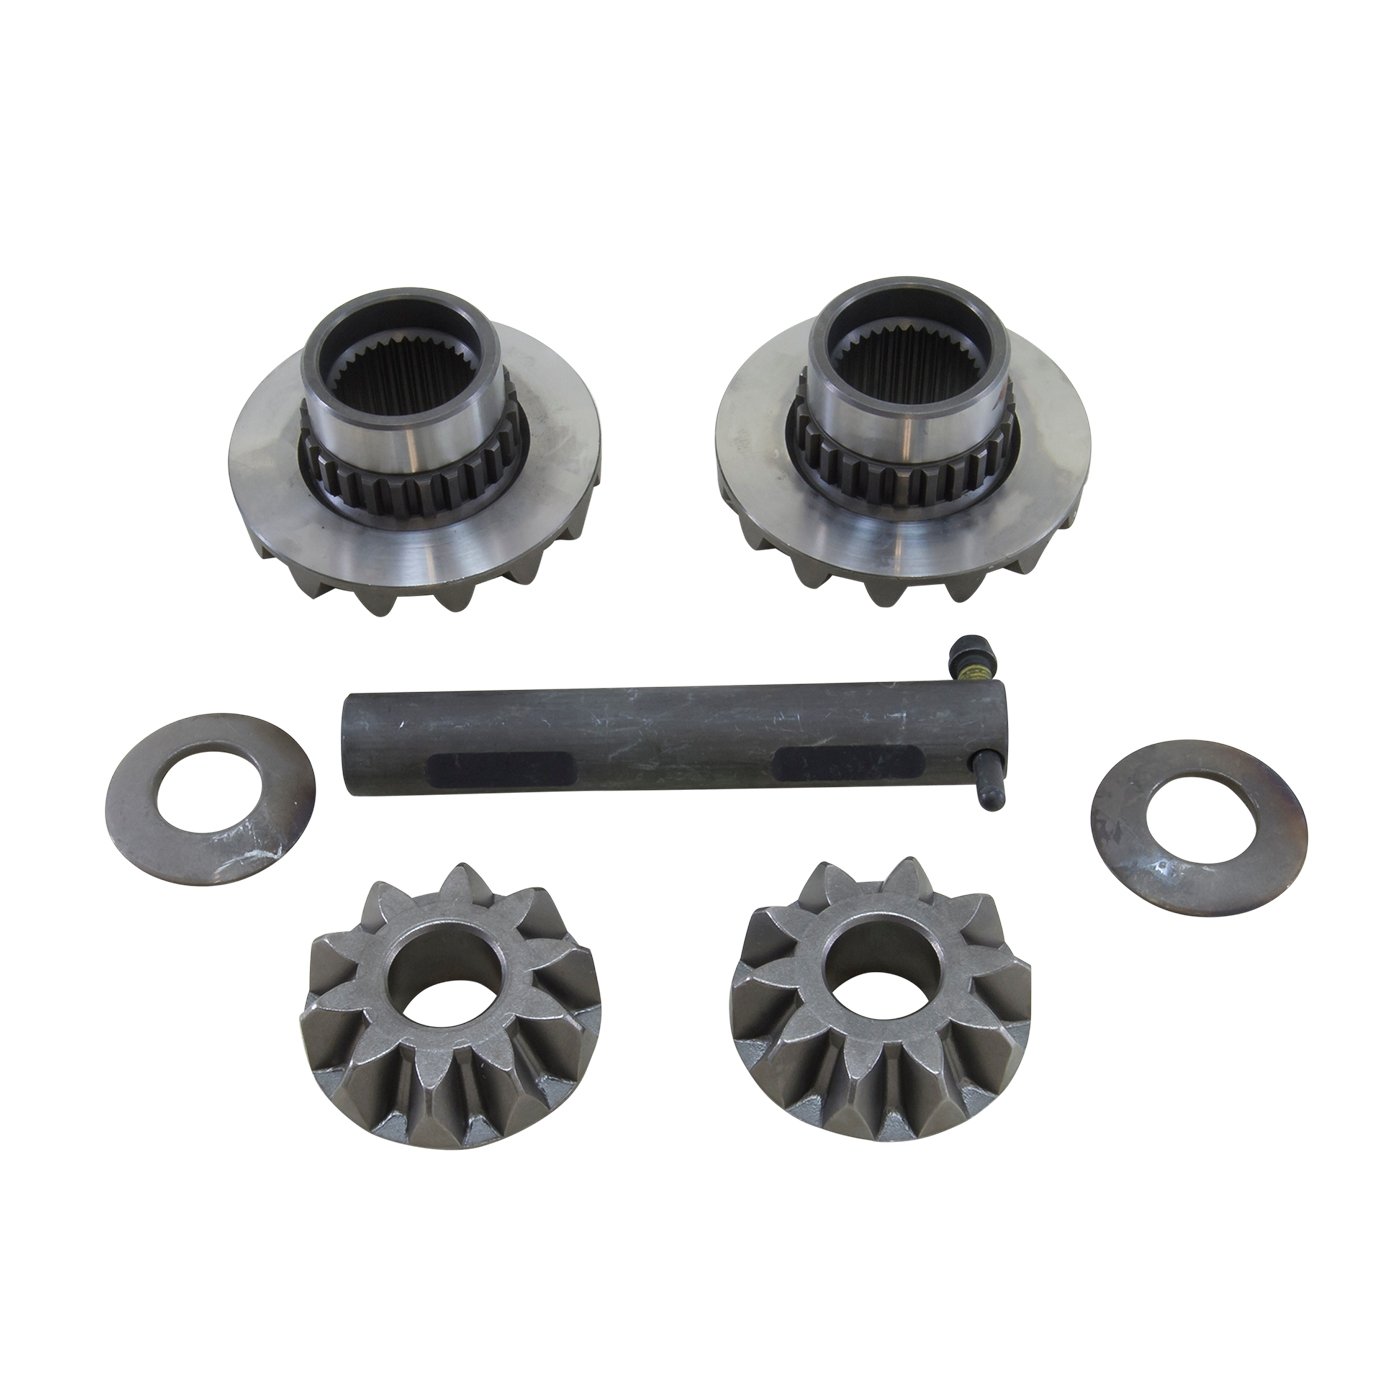 Spider Gear Kit Fits Ford 9.75 in. with Eaton Positraction